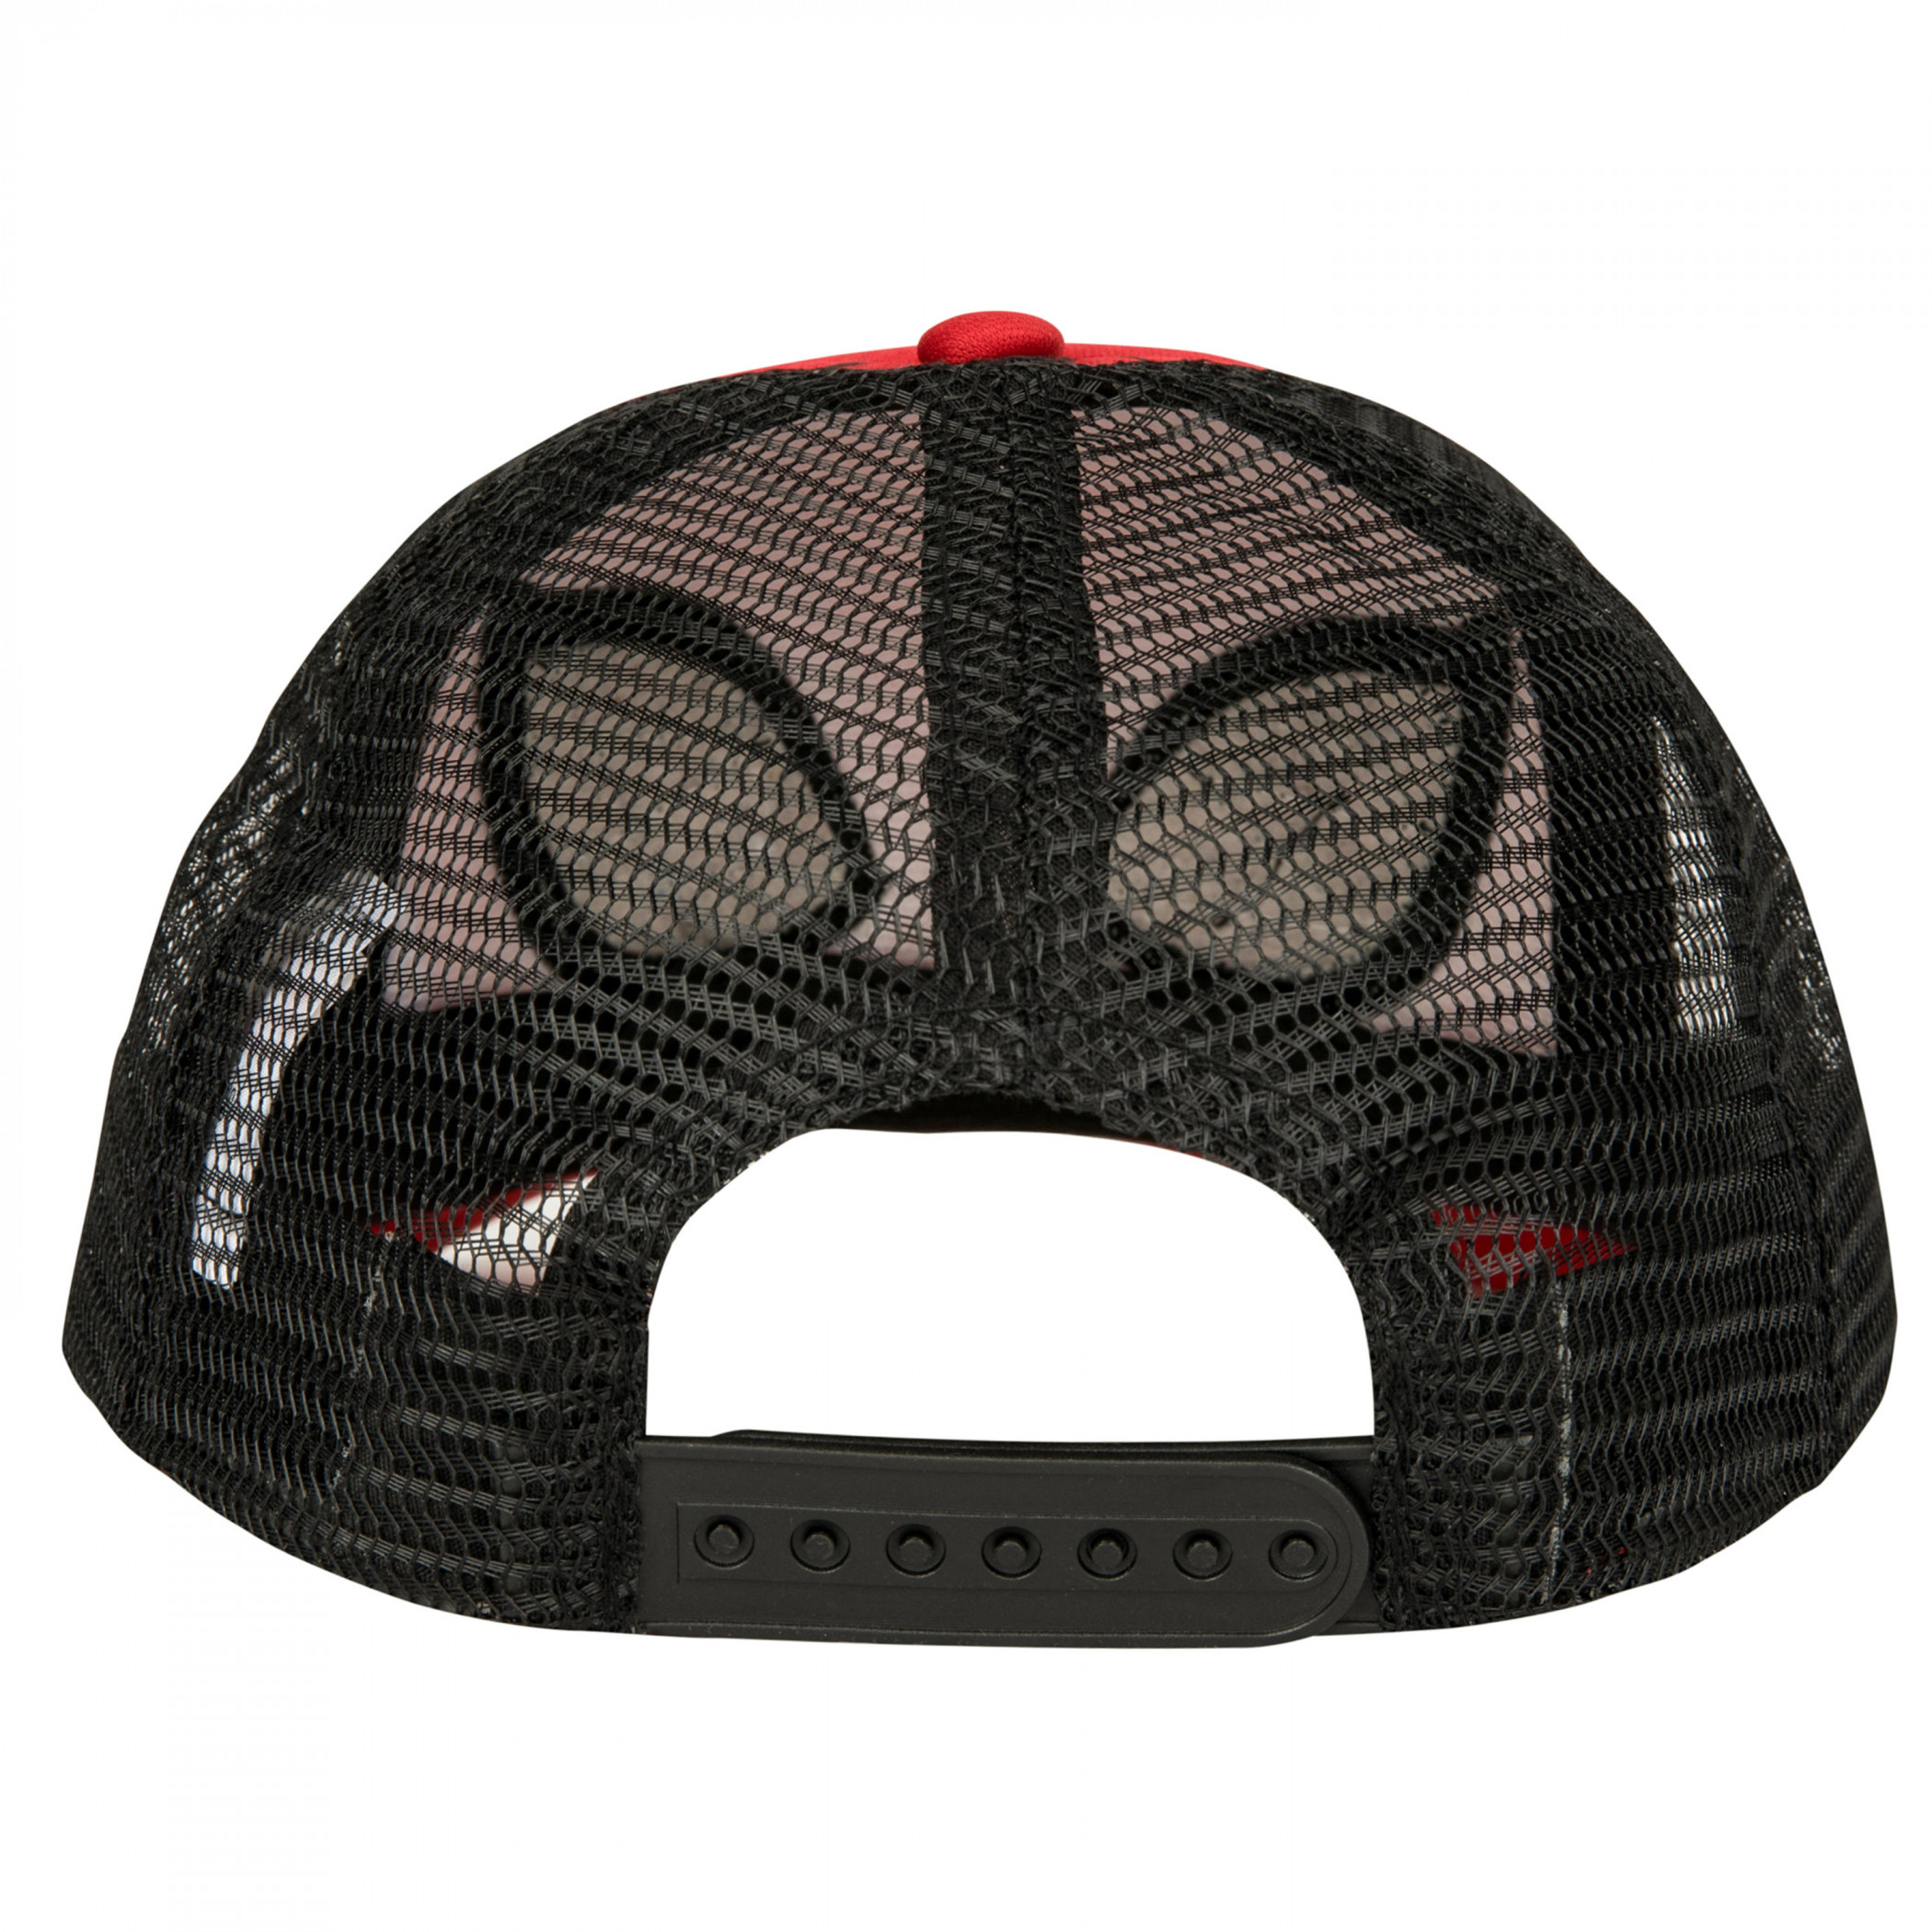 Spider-Man Glowing Eyes Embroidered Hat